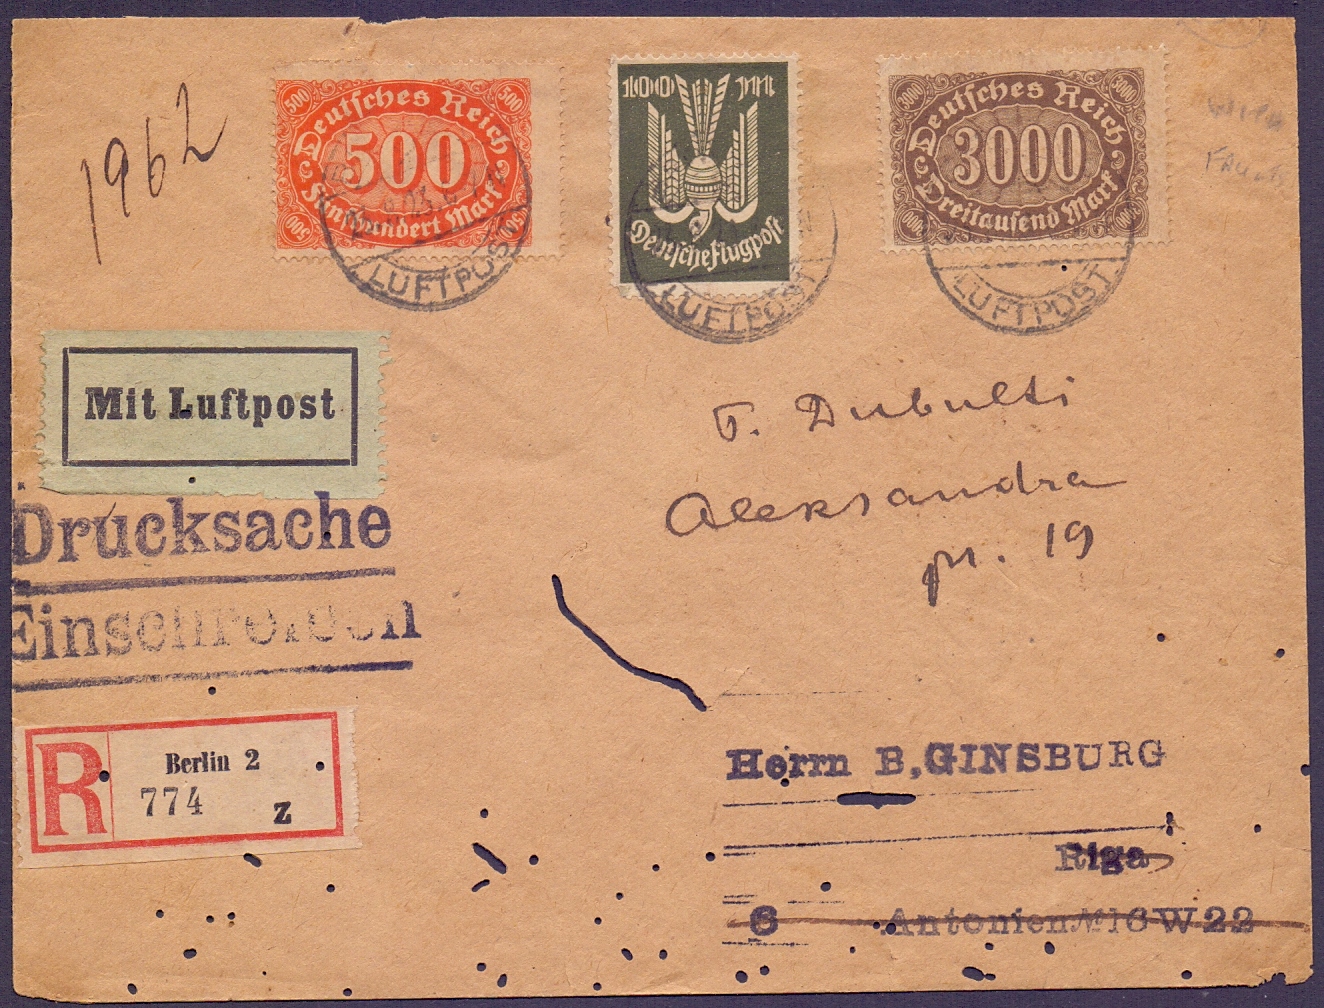 POSTAL HISTORY : GERMANY, 1923 registered envelope with 100m Air issue & two other values,